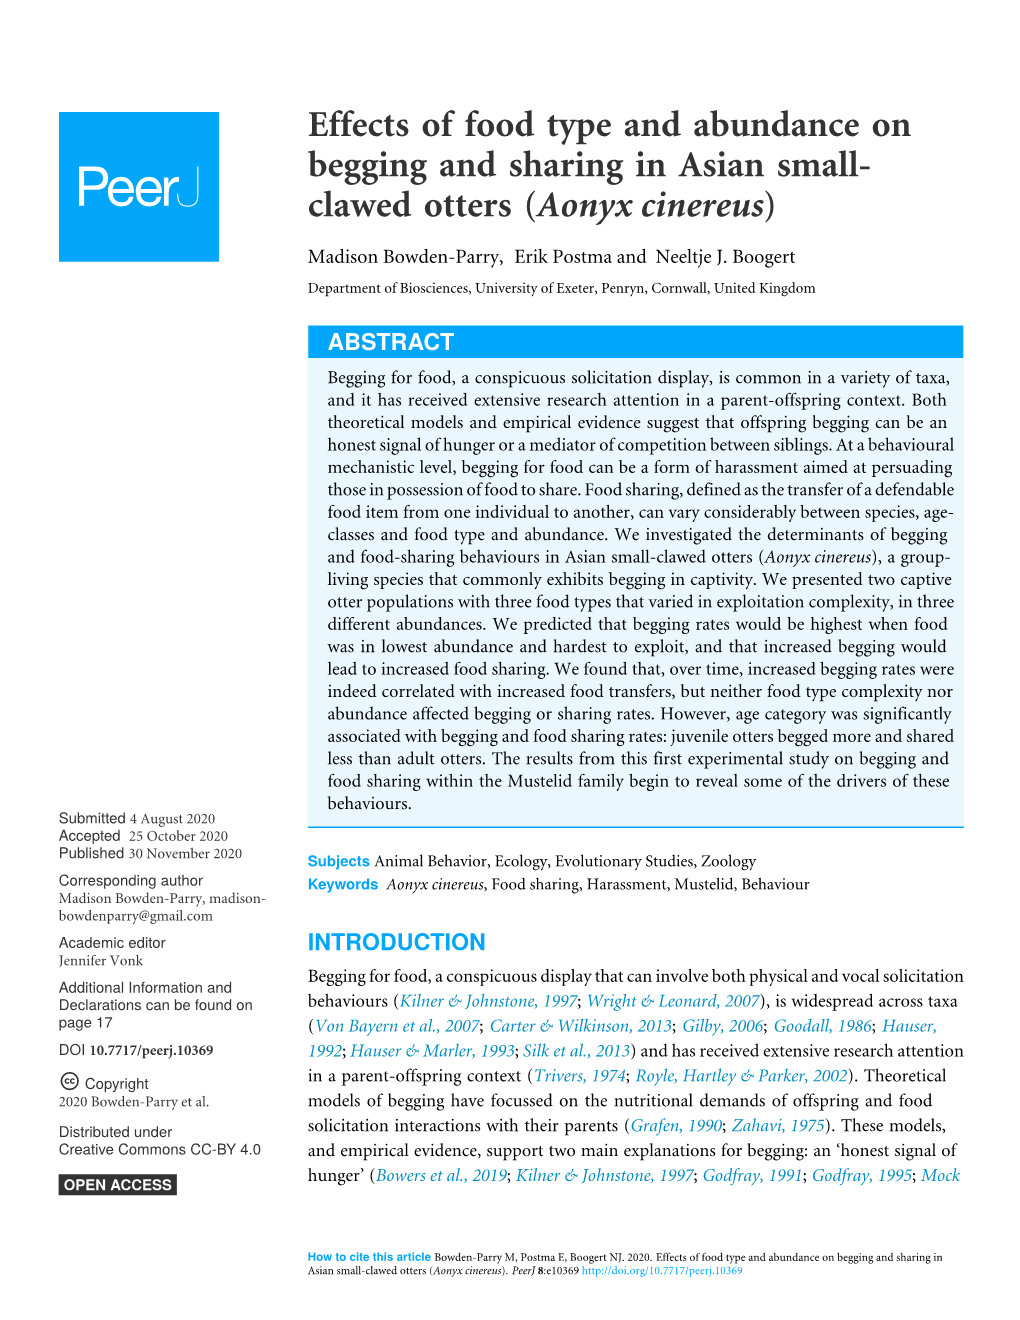 Effects of Food Type and Abundance on Begging and Sharing in Asian Small- Clawed Otters (Aonyx Cinereus)